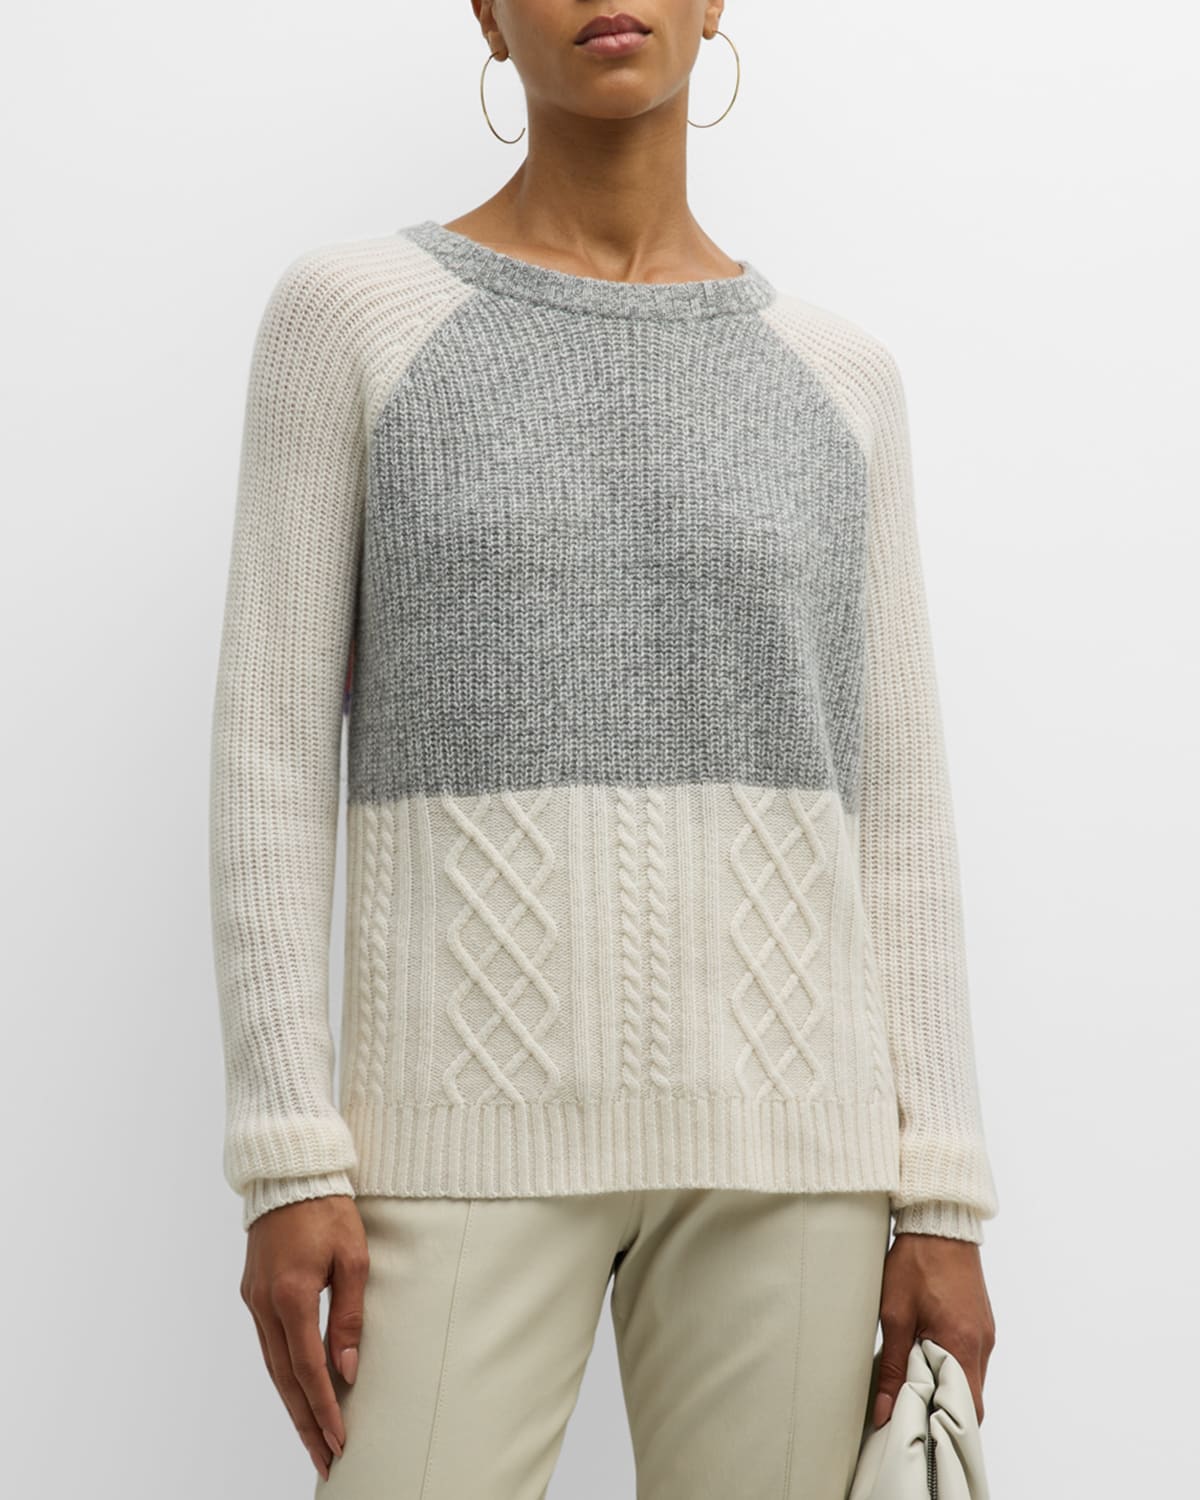 Striped-Back Colorblock Cable-Knit Sweater